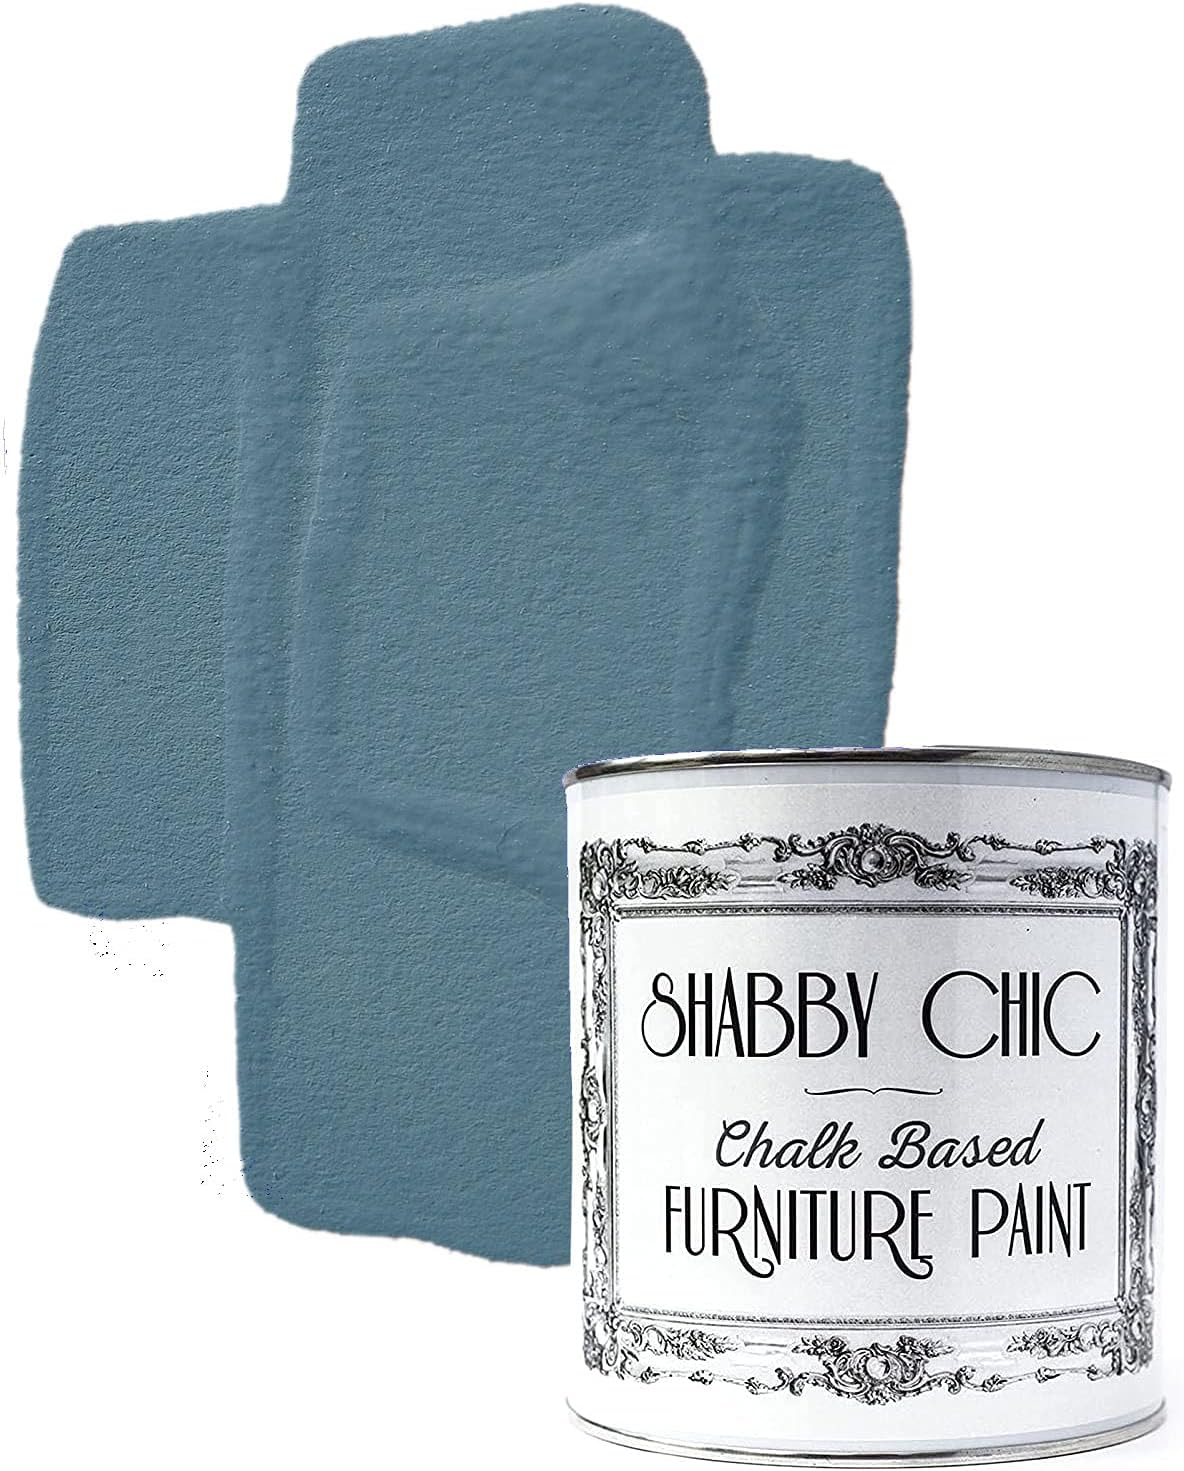 Shabby Chic Chalked Furniture Paint: Luxurious Chalk [...]